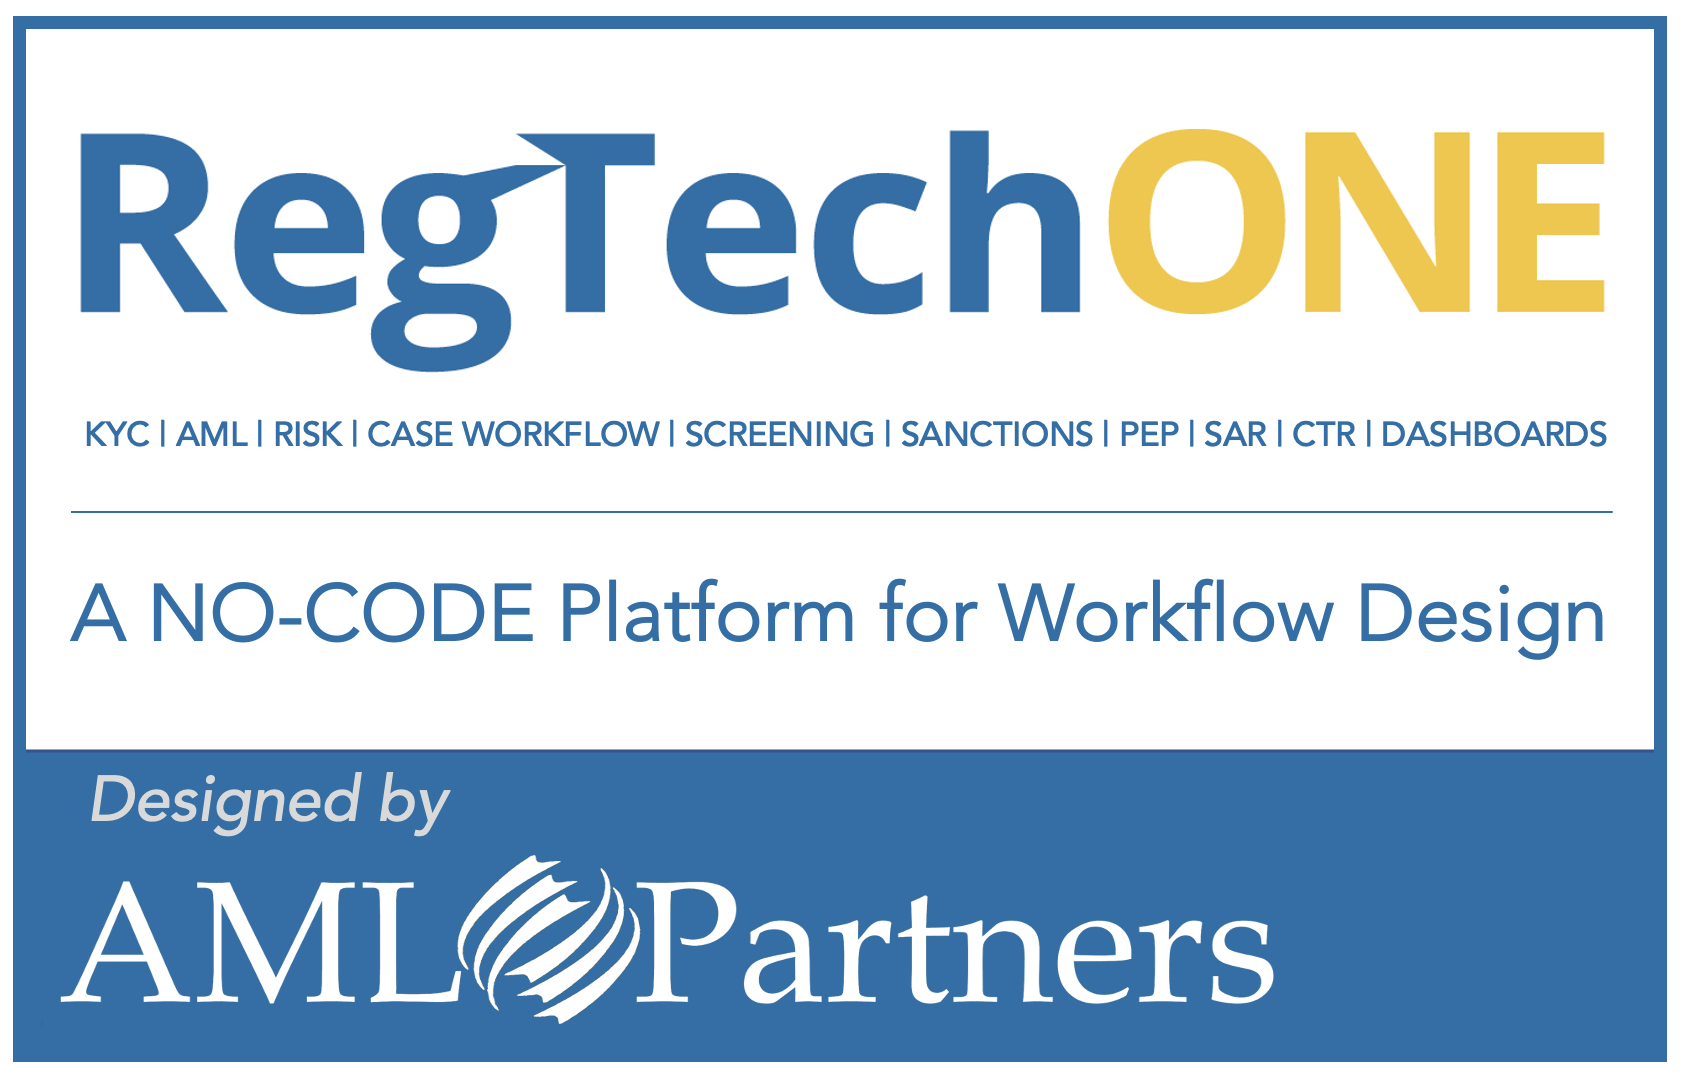 Art includes logos for RegTechONE and AML Partners. RegTechONE is an AML software platform with KYC software, transaction monitoring software, sanctions screening software, FinCEN 314a software, and more. Software for AML Compliance and GRC.